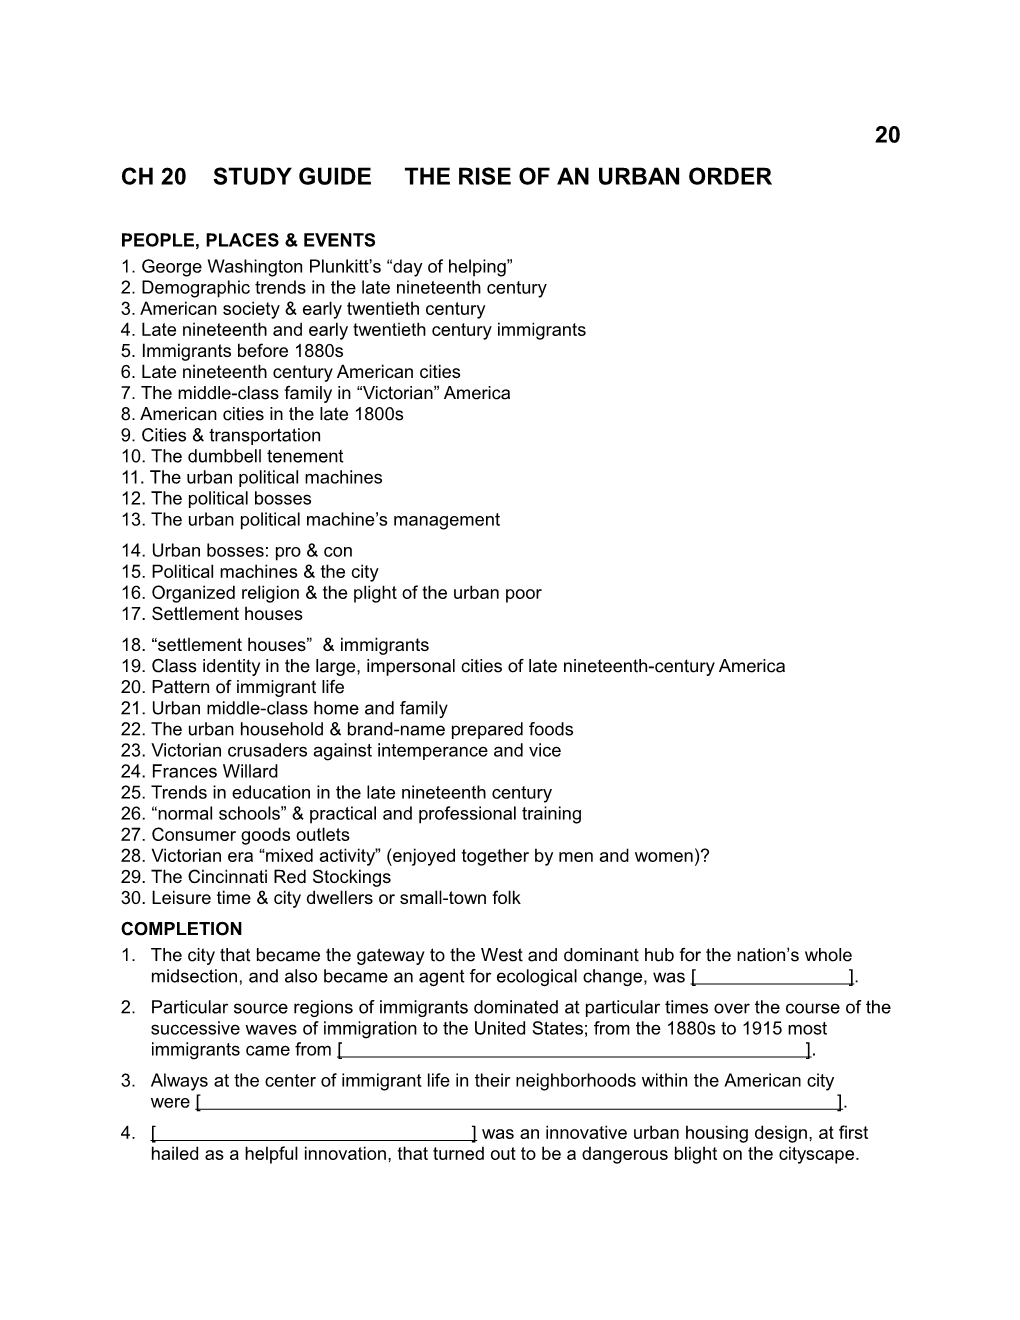 Ch 20 Study Guide the Rise of an Urban Order